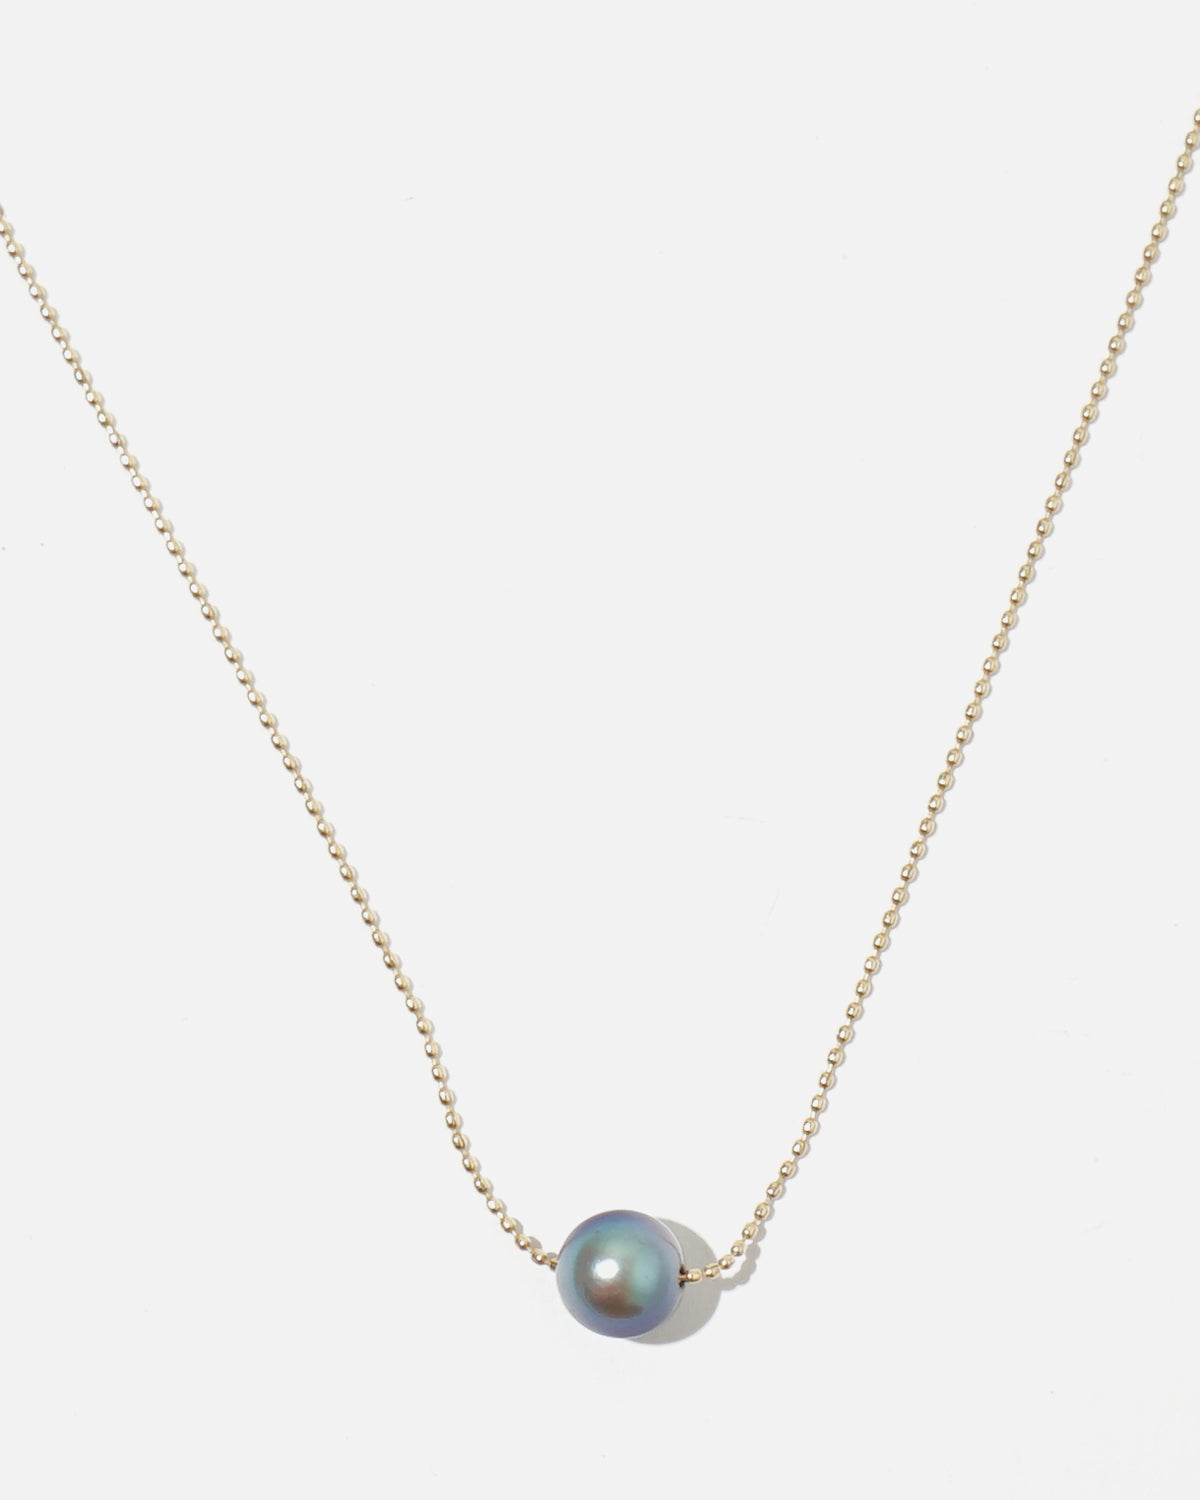 14k Gold Ball Chain Necklace w/ Black Pearl